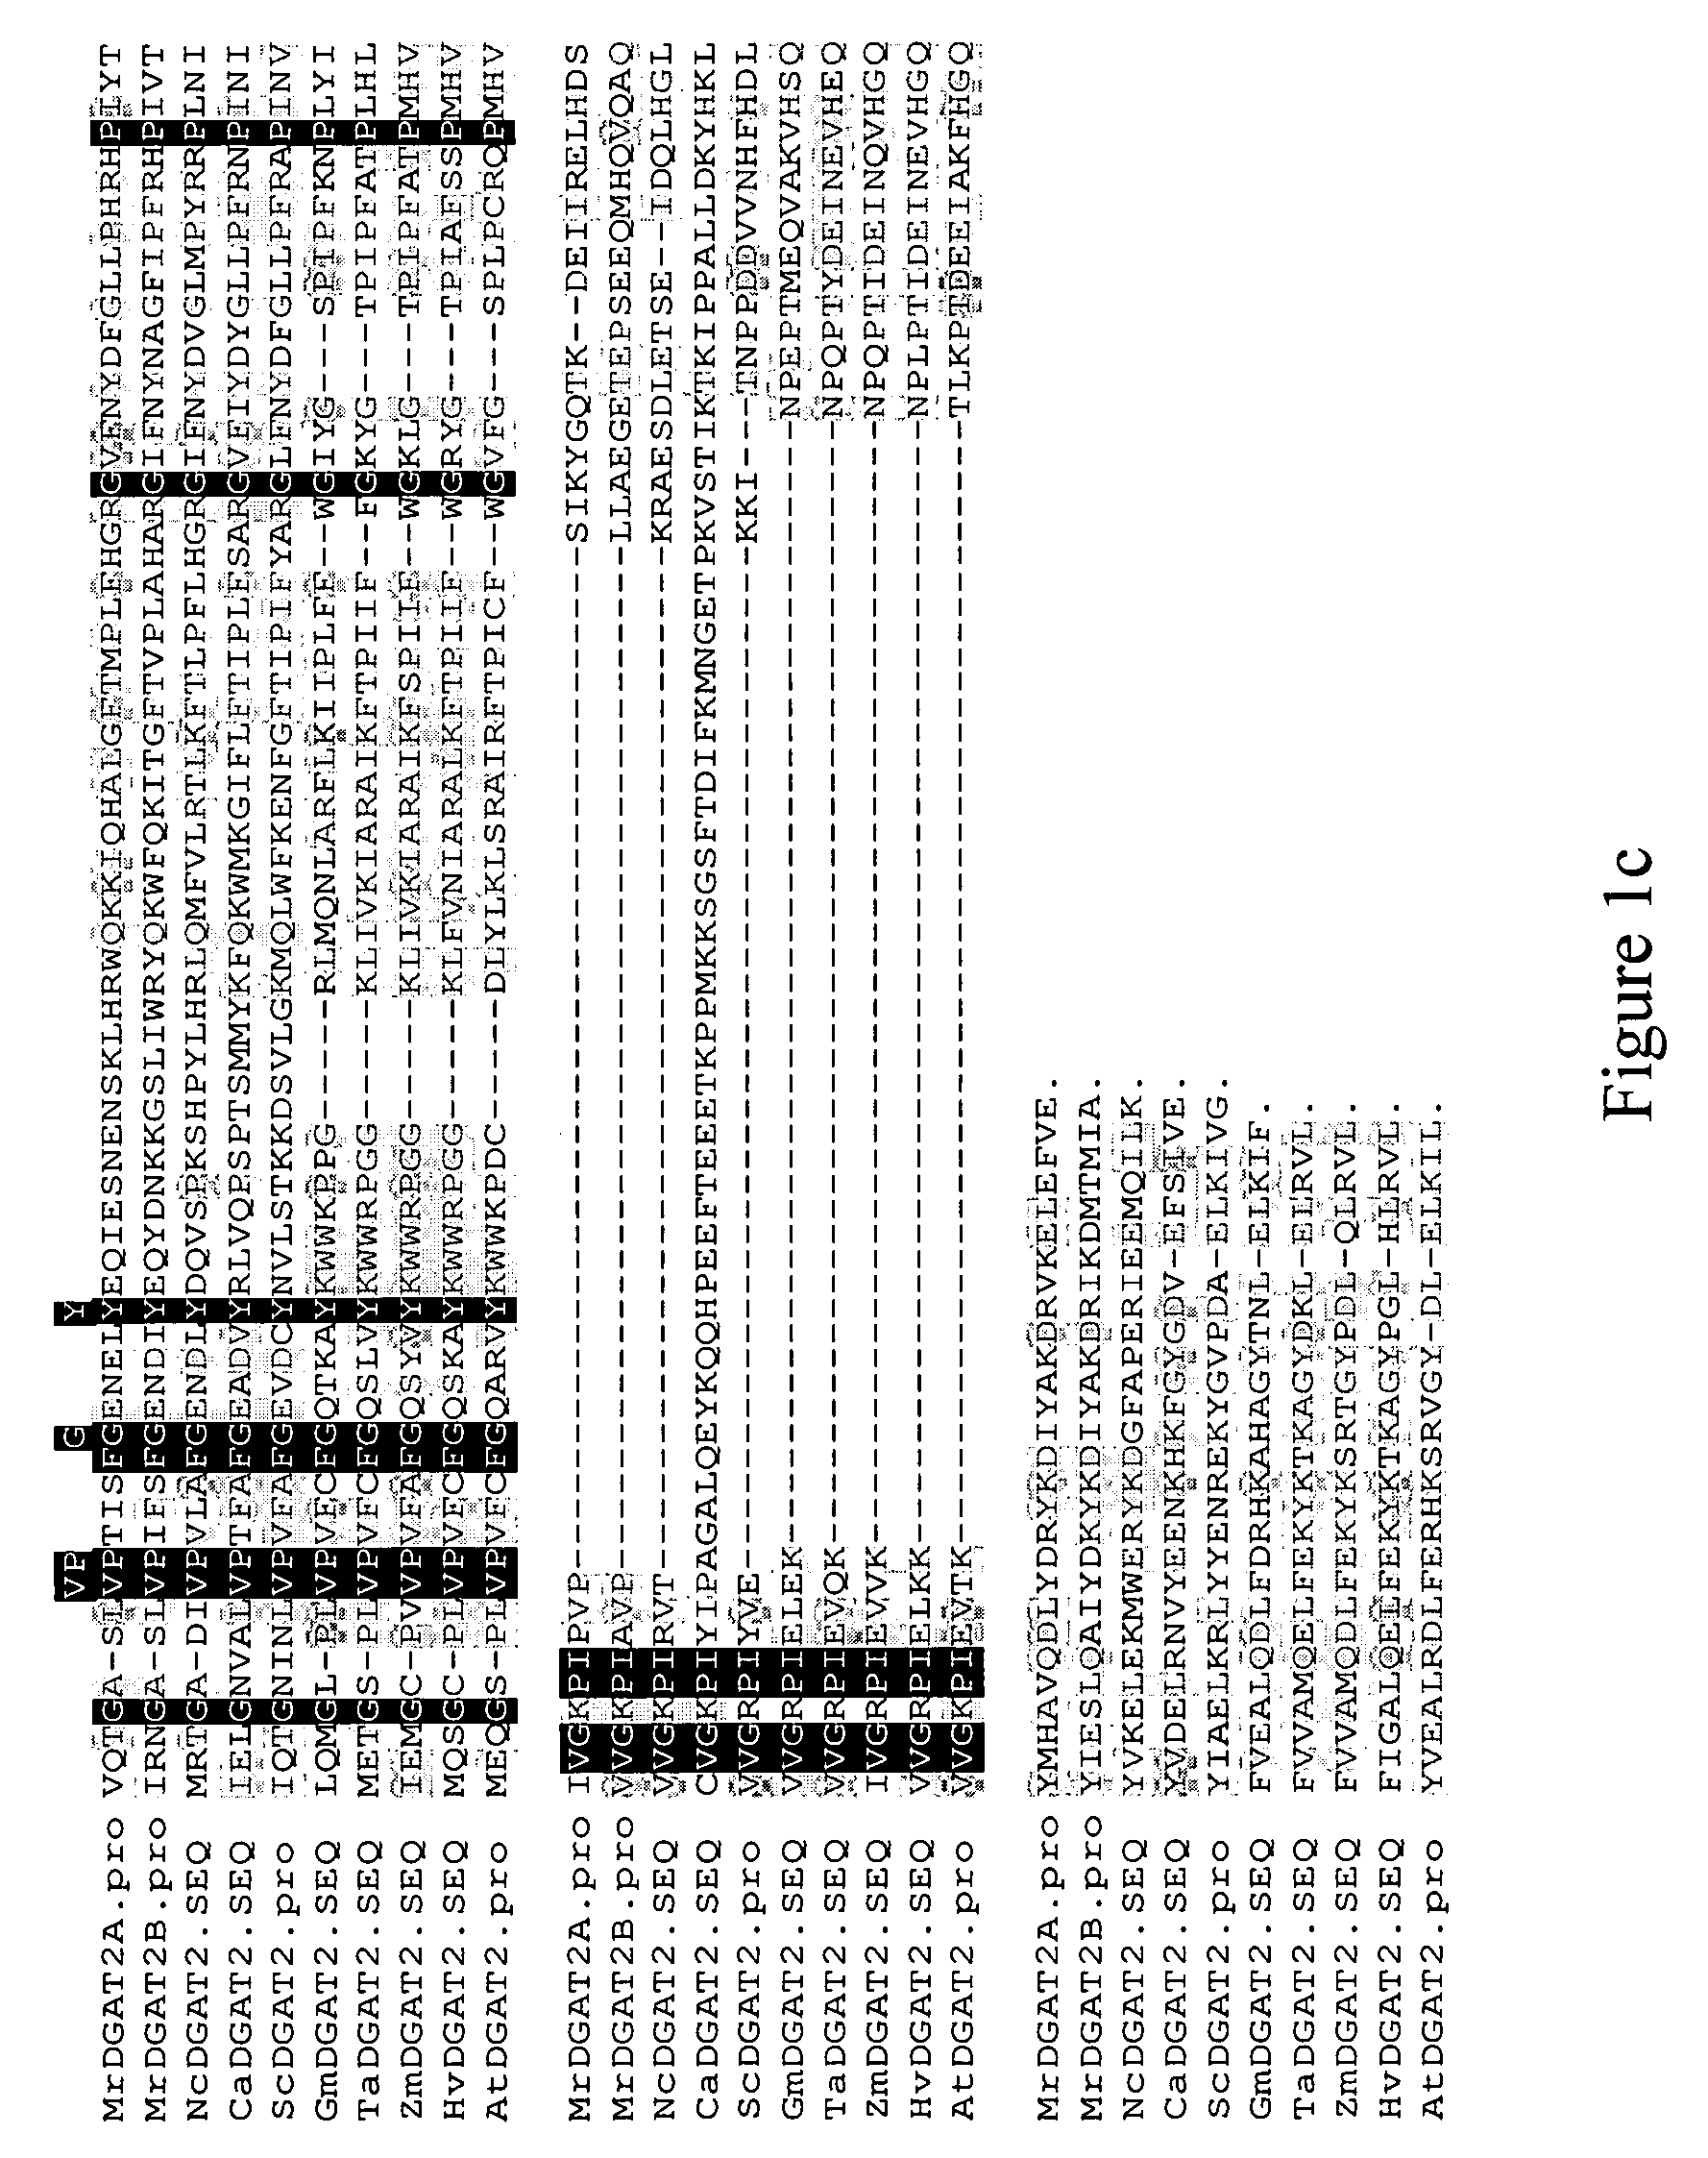 Diacylglycerol acyltransferase nucleic acid sequences and associated products